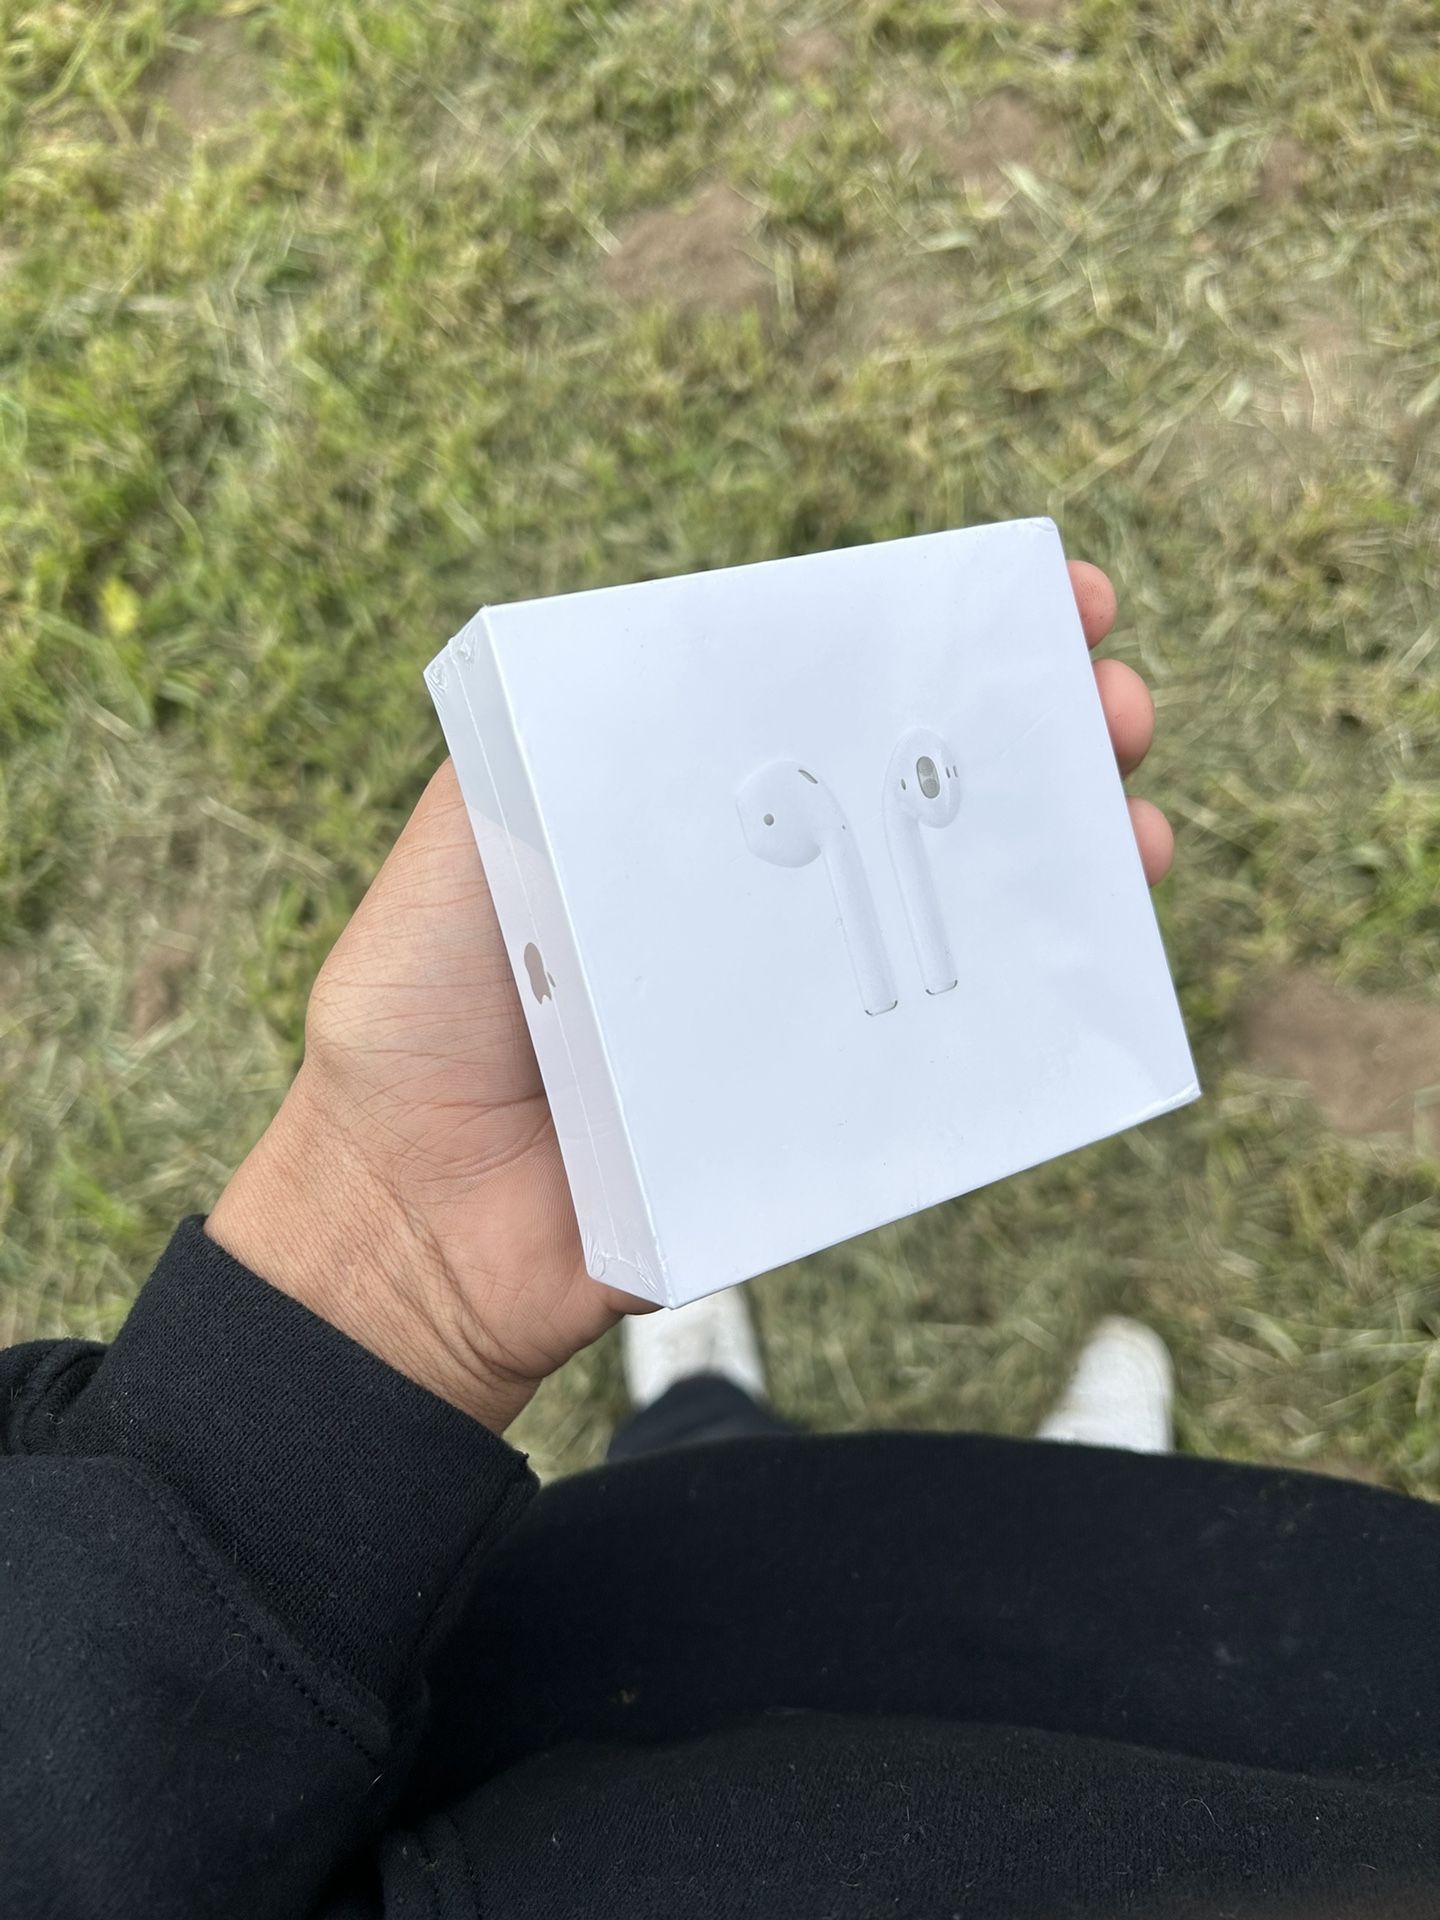 Apple AirPods 2nd gen Noise Cancelling with valid serial   